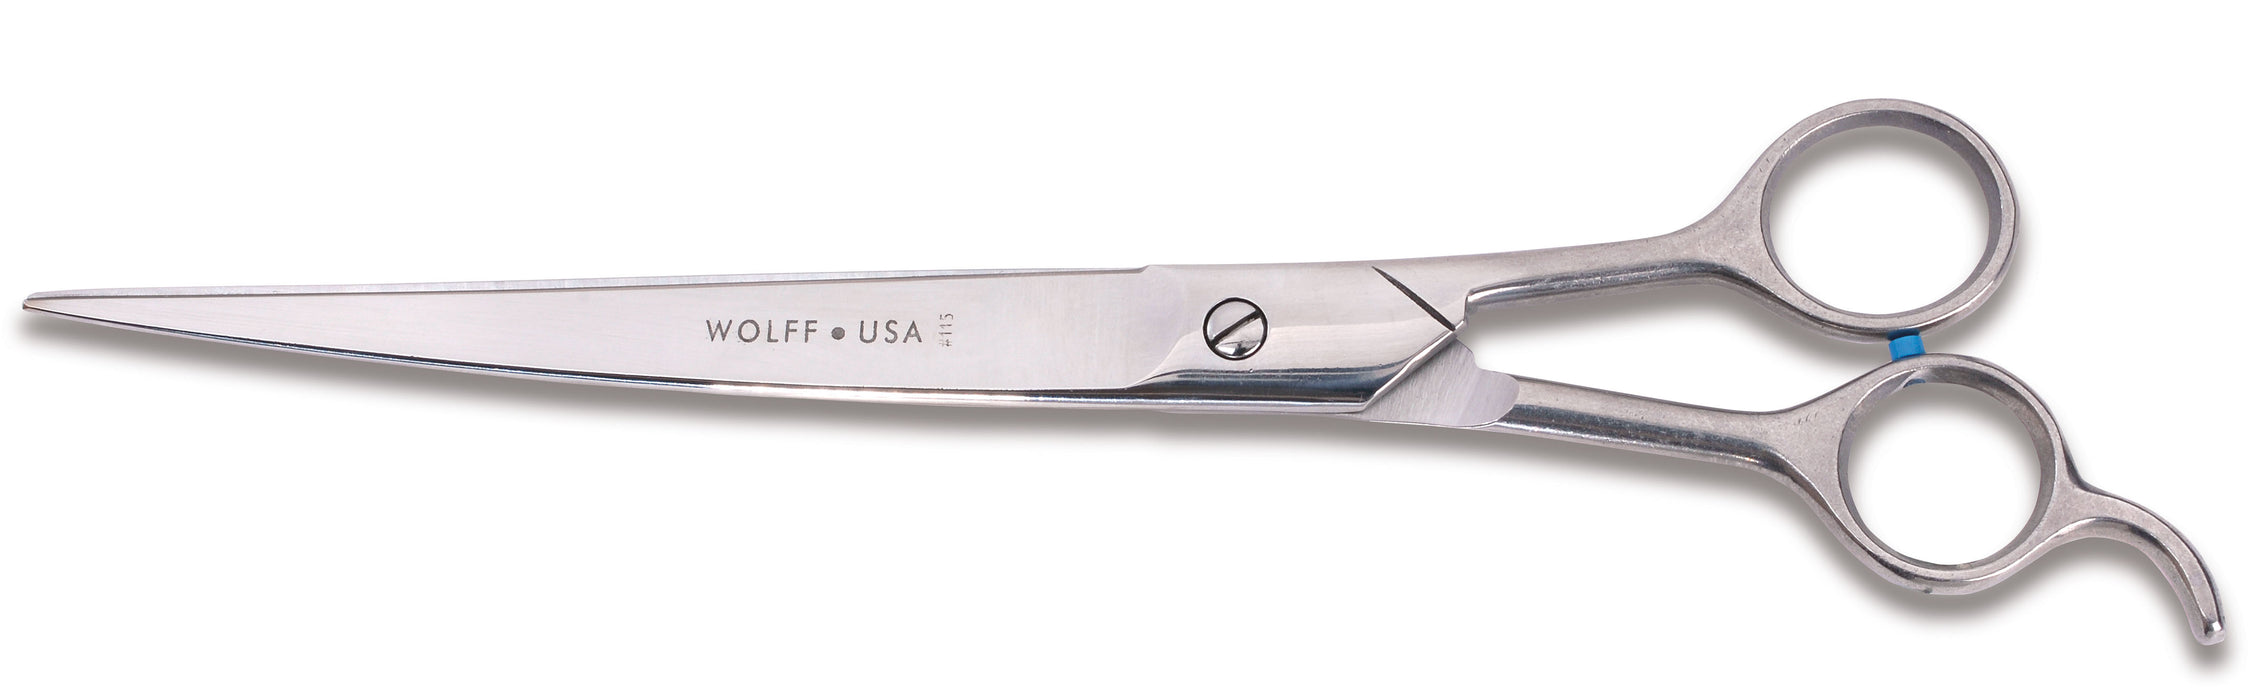 Wolff 10" Fillipino Style Grooming Shears with Curved Blades